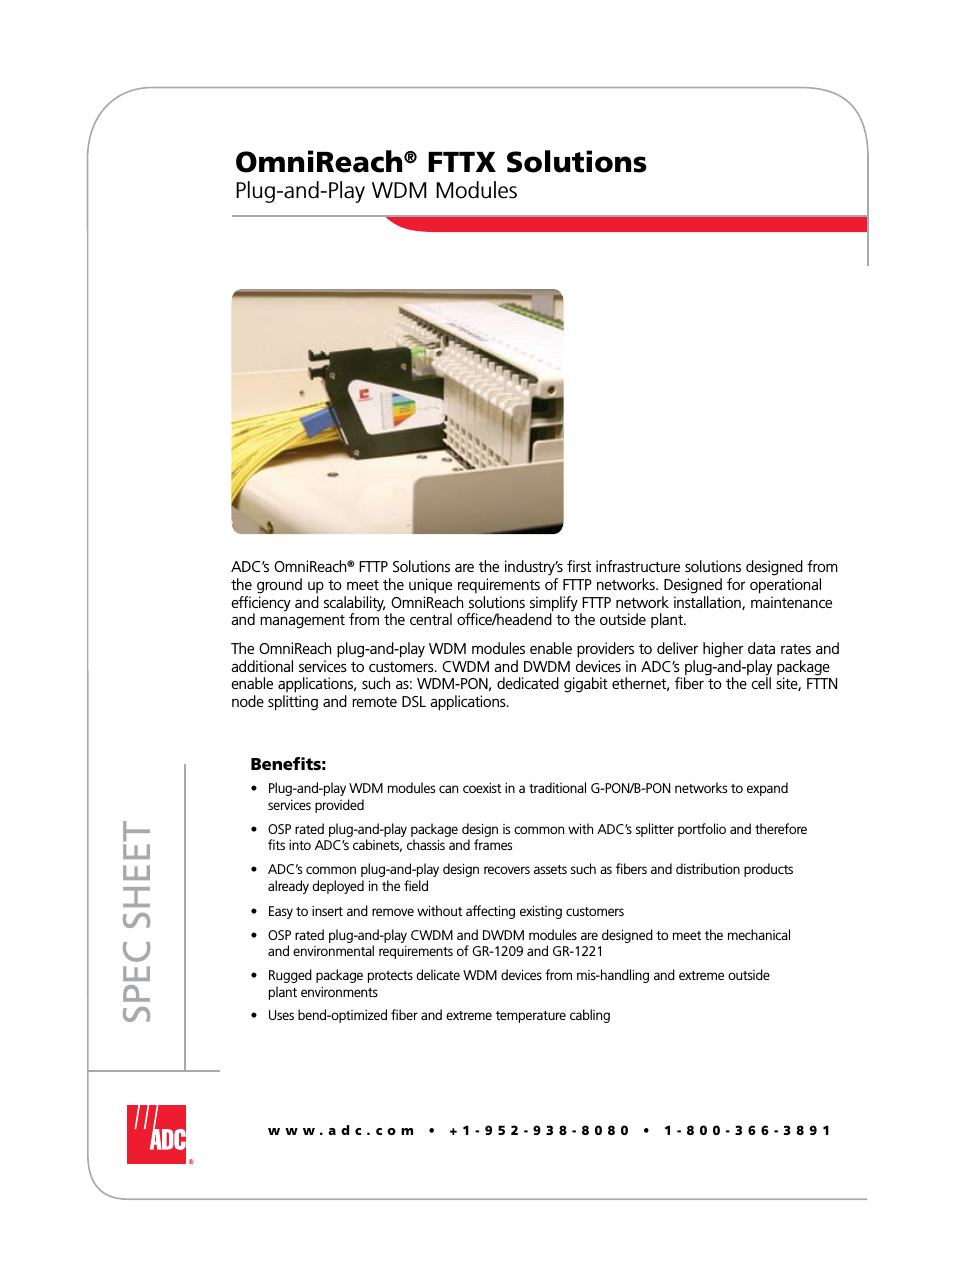 FTTX Solutions OmniReach (Page 1)